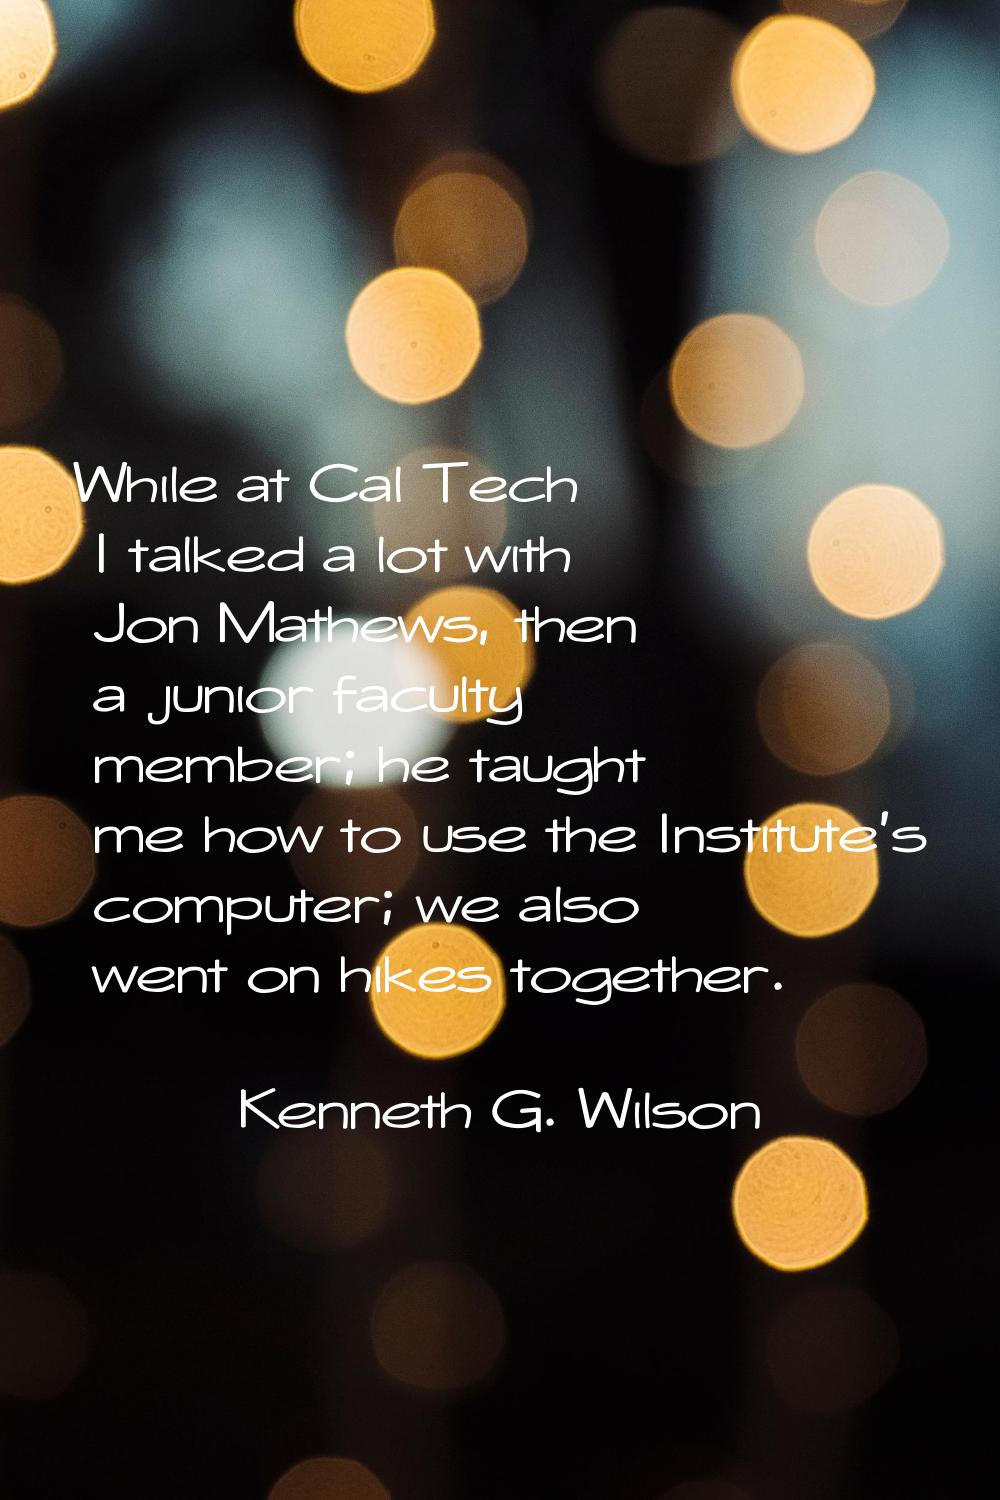 While at Cal Tech I talked a lot with Jon Mathews, then a junior faculty member; he taught me how t